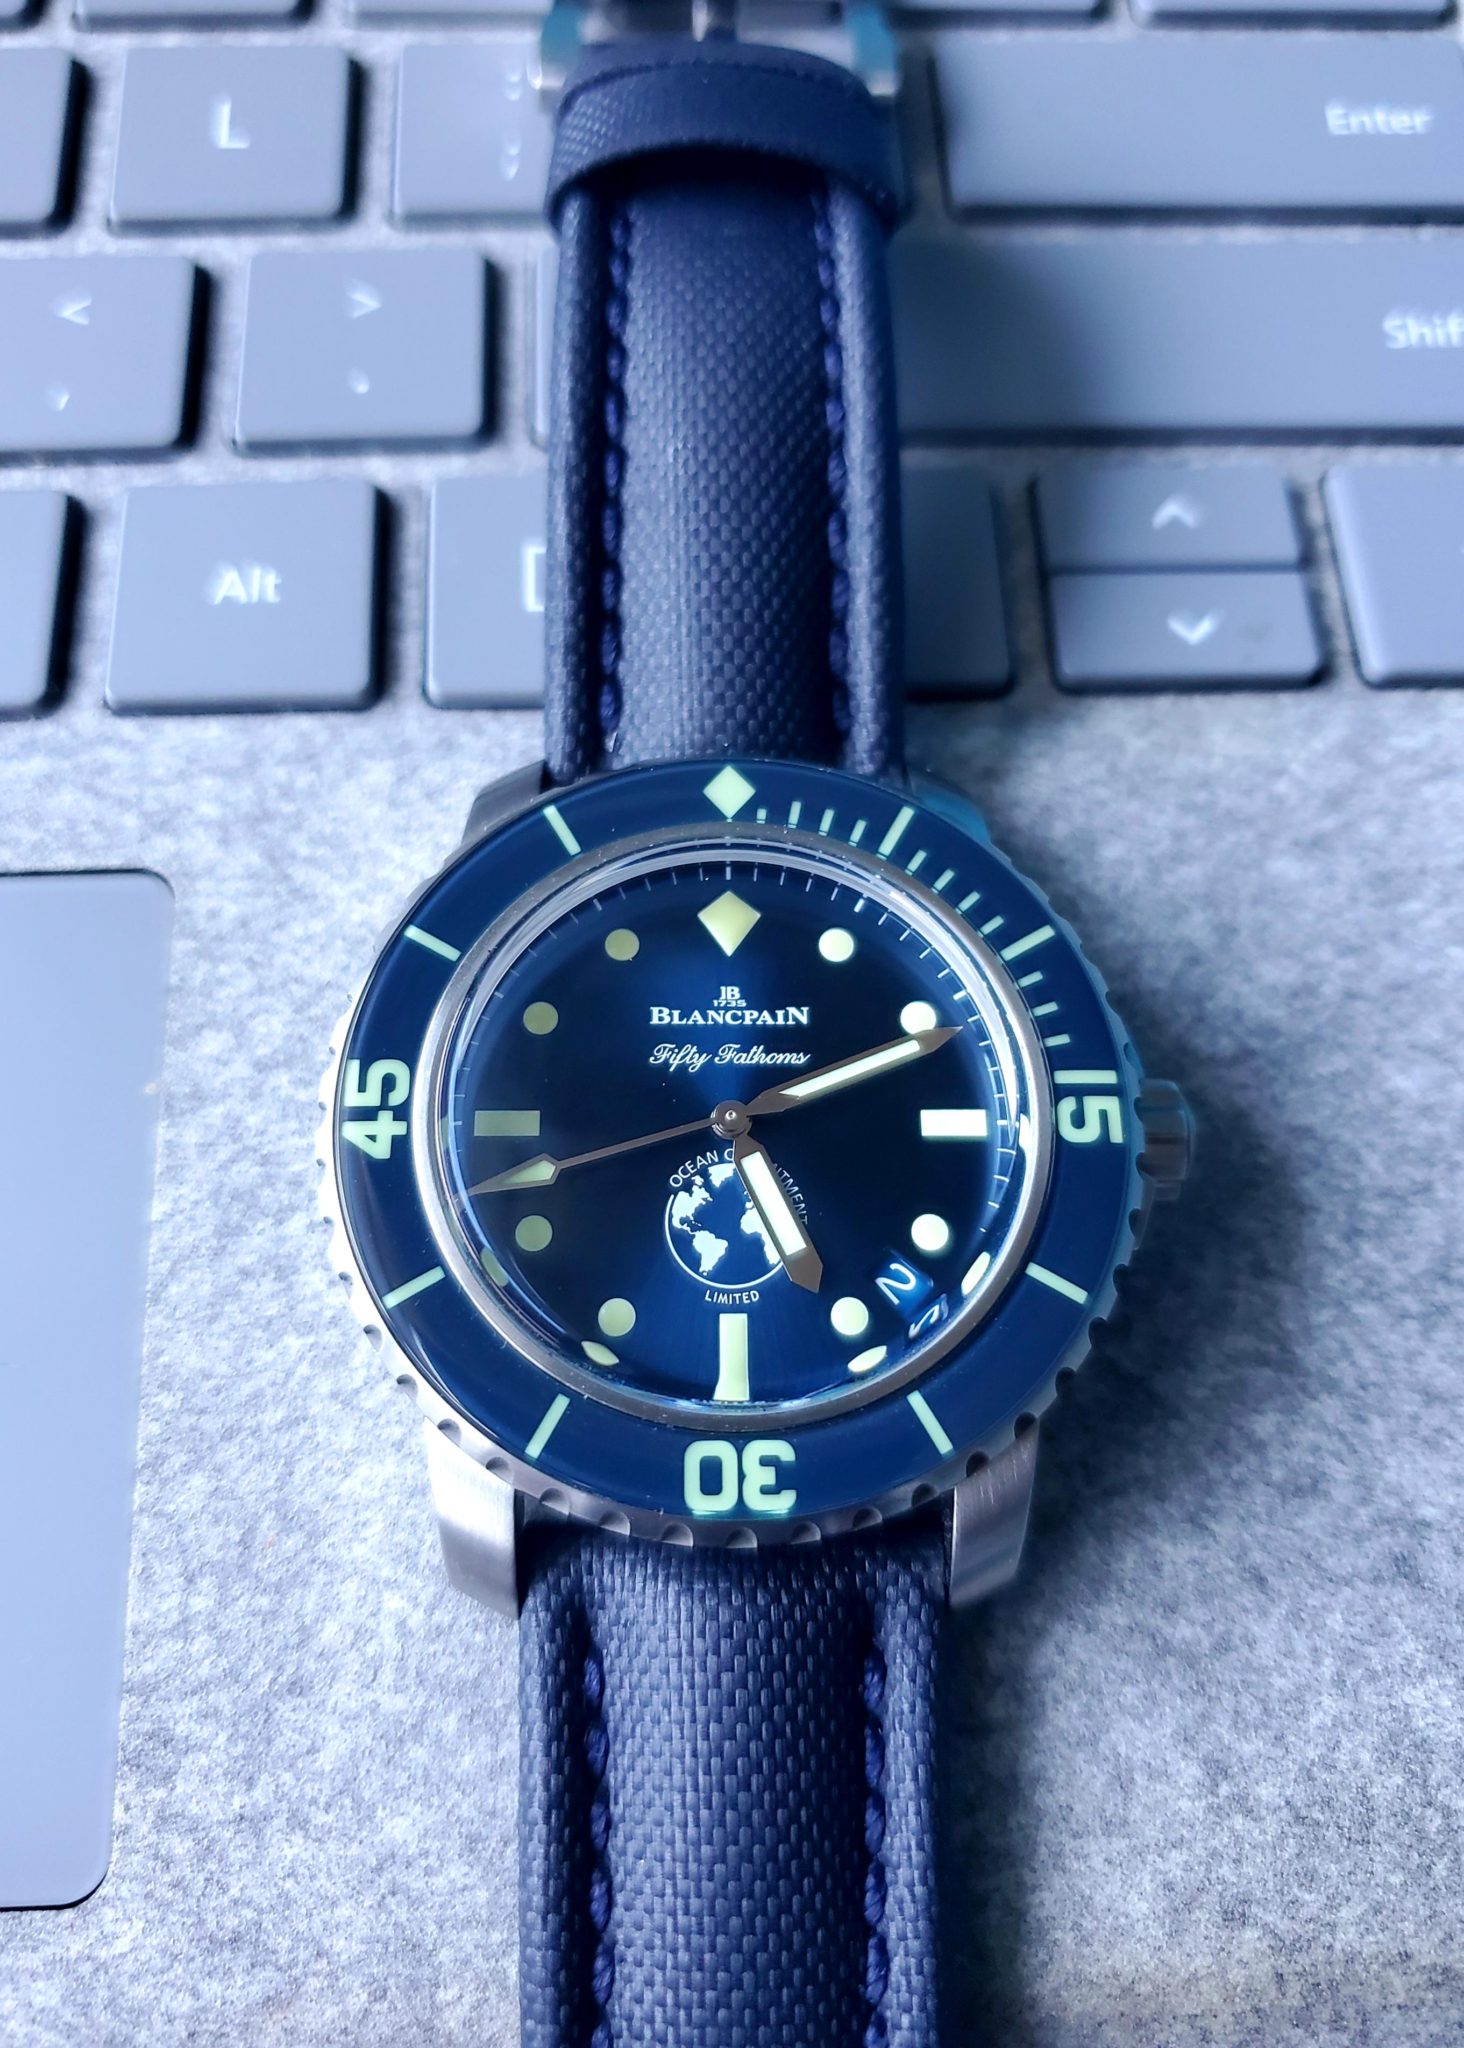 Owner Review: Blancpain Fifty Fathoms Ocean Commitment III